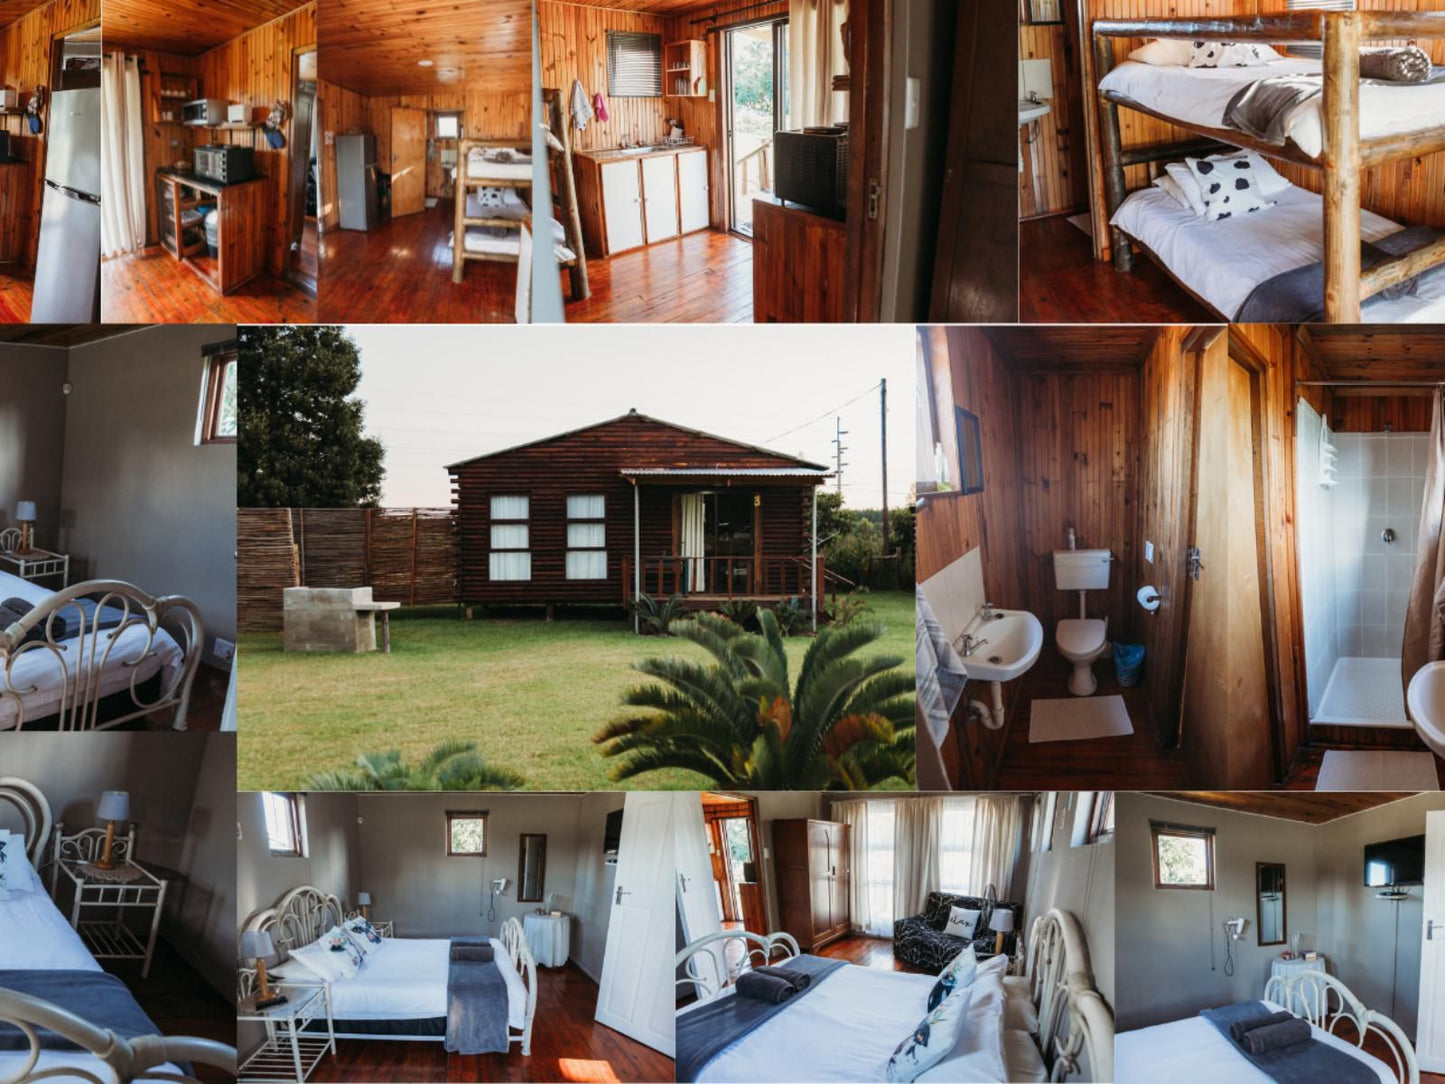 Amperda Log Cabins Tsitsikamma Eastern Cape South Africa Cabin, Building, Architecture